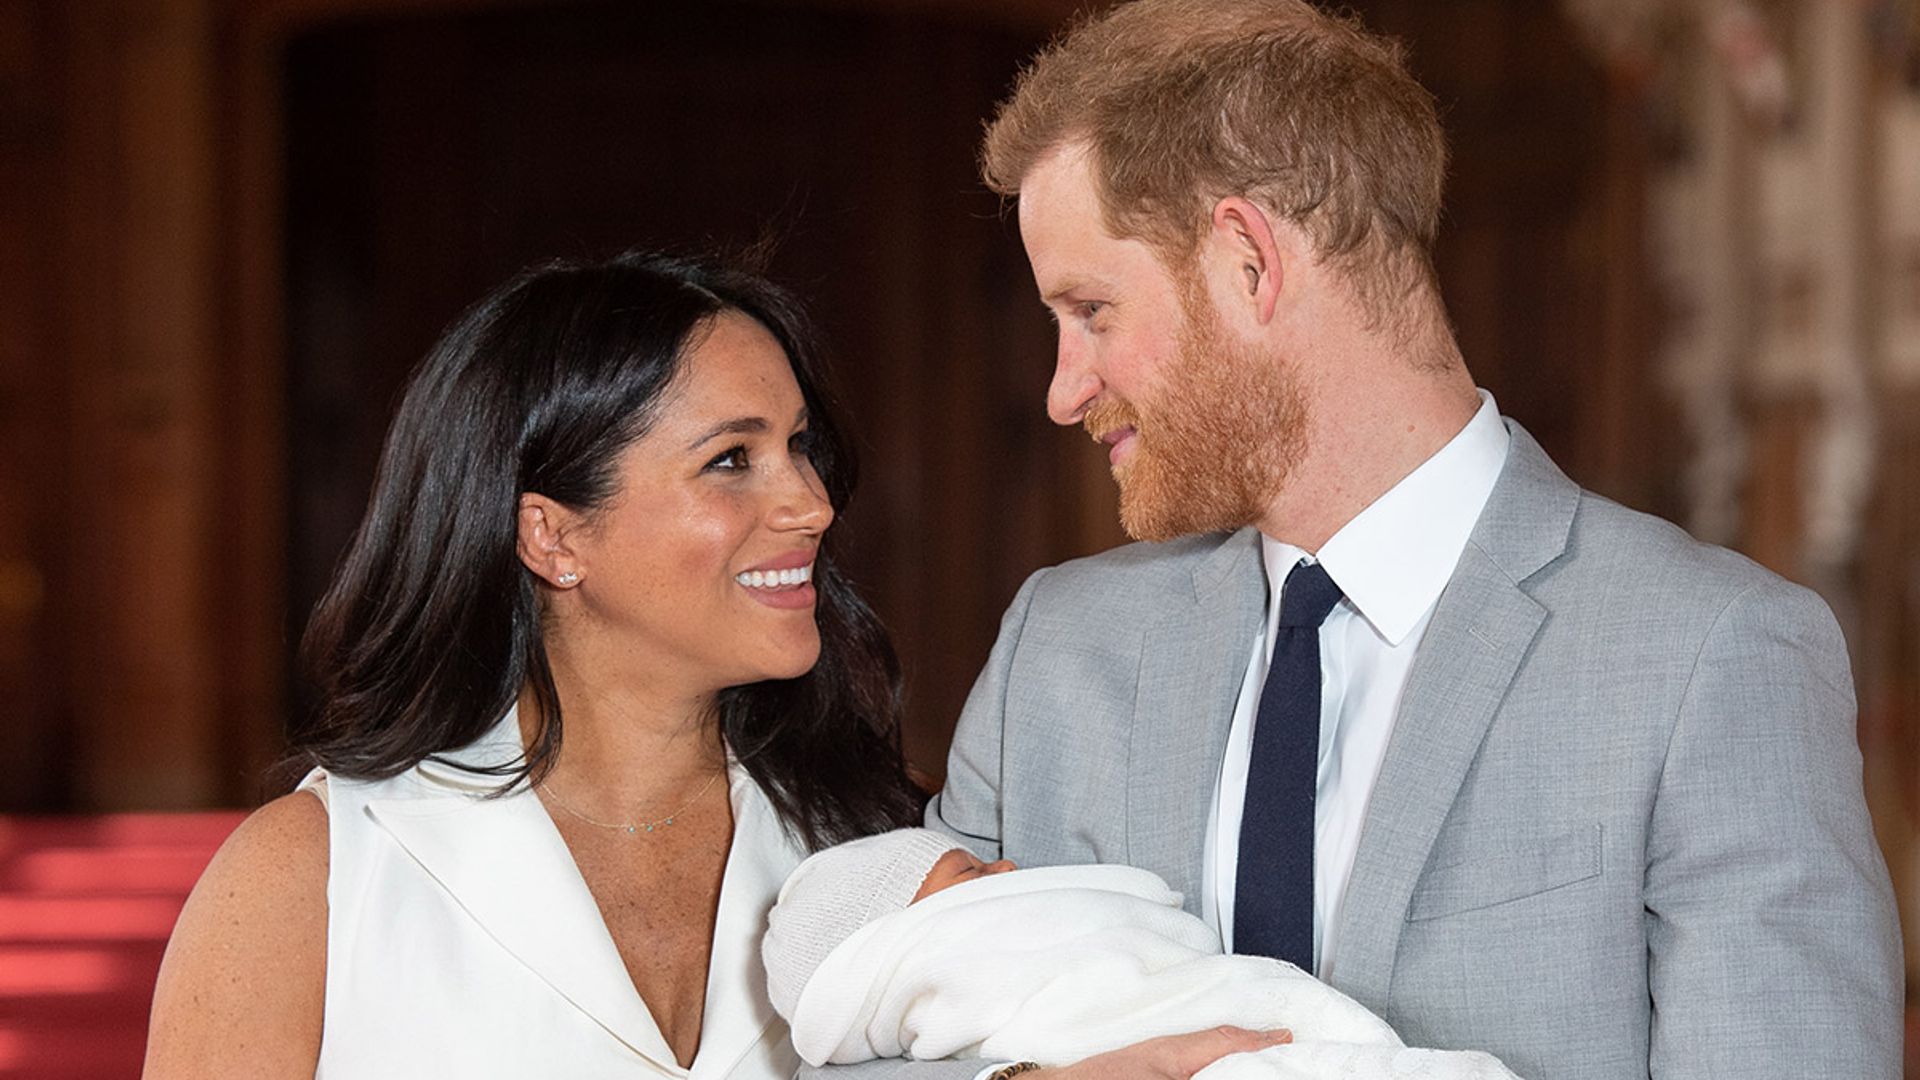 Prince Harry and Meghan Markle share picture of baby Archie Harrison's adorable jacket